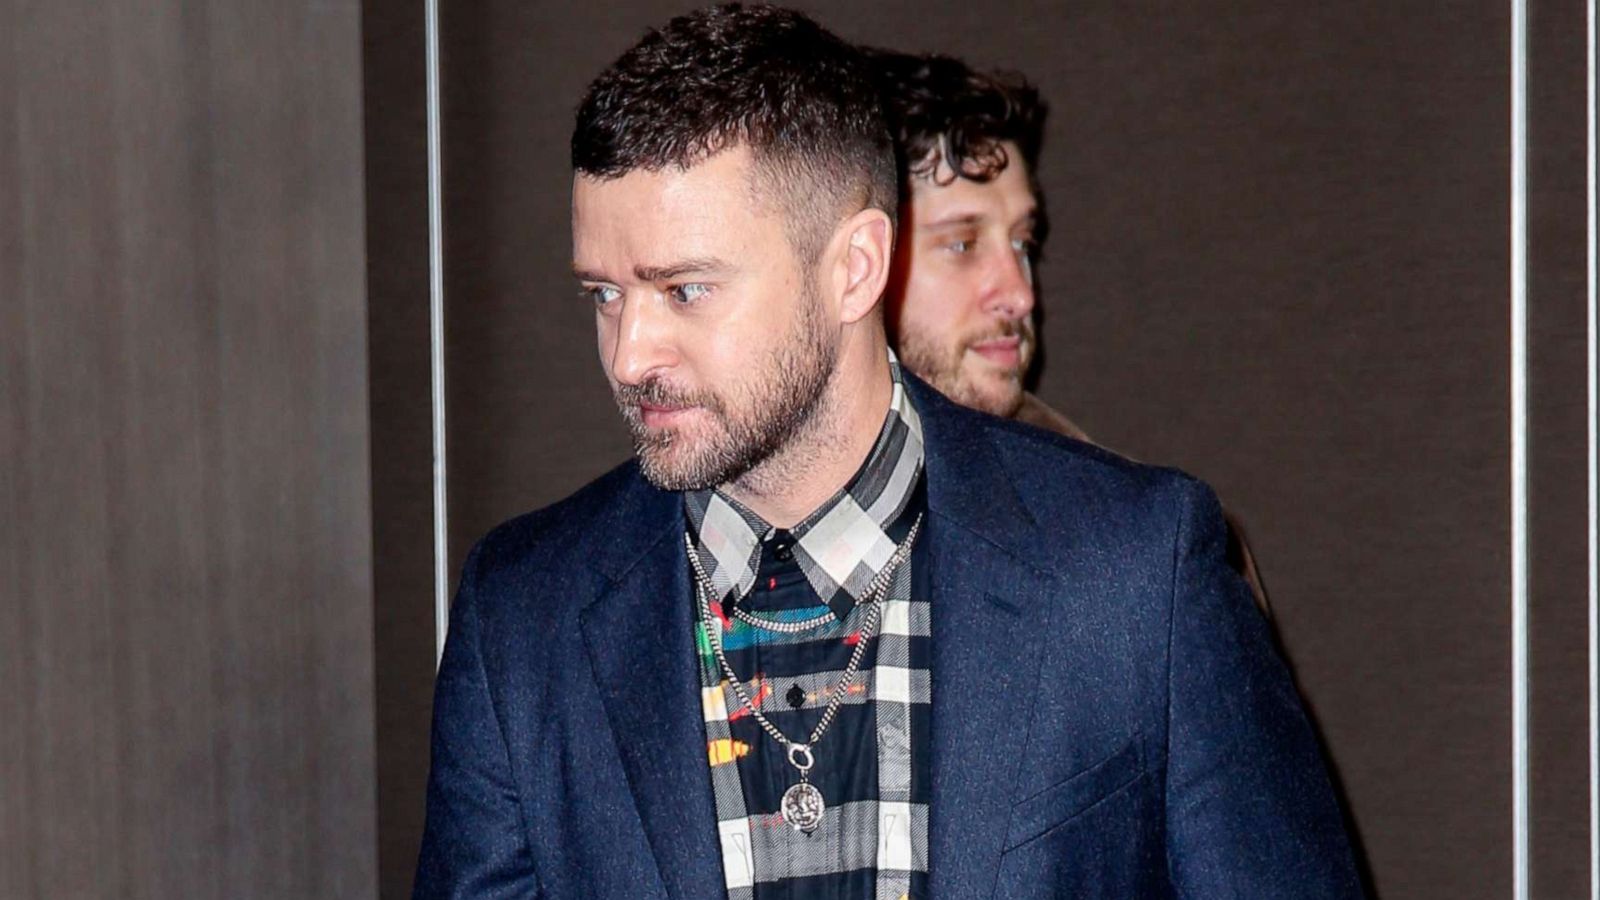 Justin Timberlake apologizes to Britney Spears and Janet Jackson